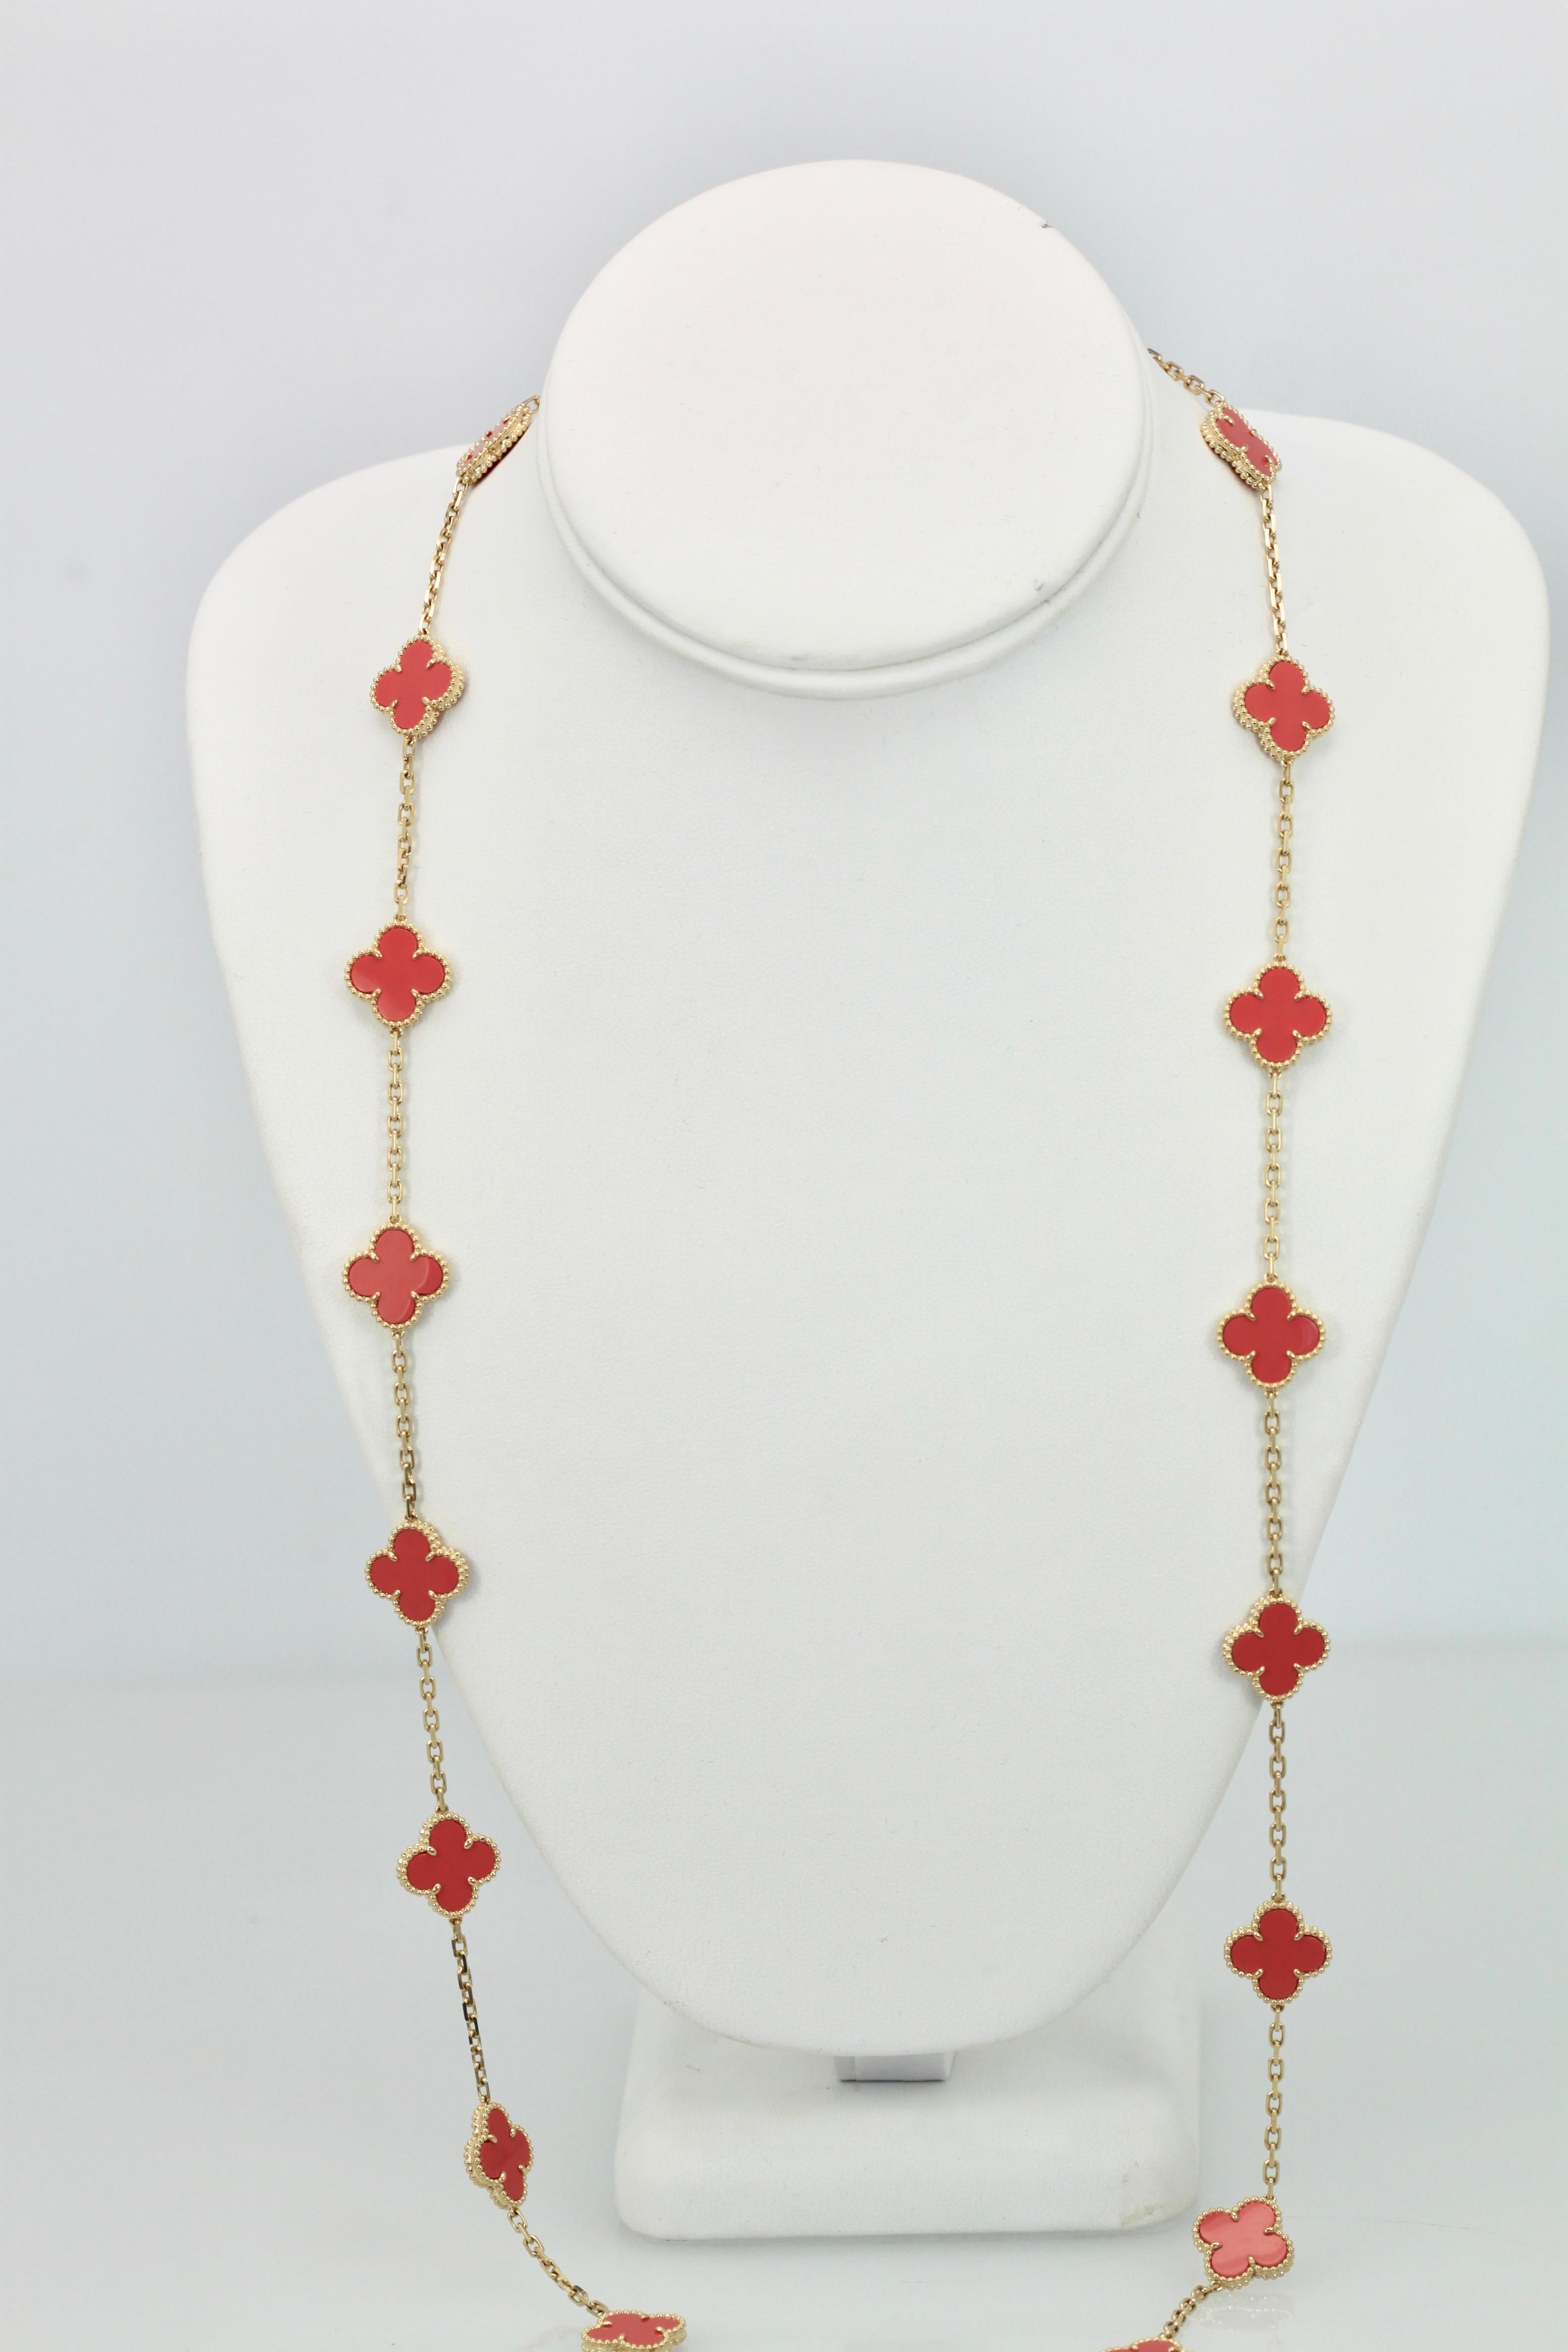 This gorgeous Coral Alhambra is the 20 motif necklace in 18K Yellow Gold and it is stunning.  This Coral Alhambra is rare as Coral is extinct and these are no longer made.  This piece was made in 1981 and authenticated by Van Cleef in 2015.  It is